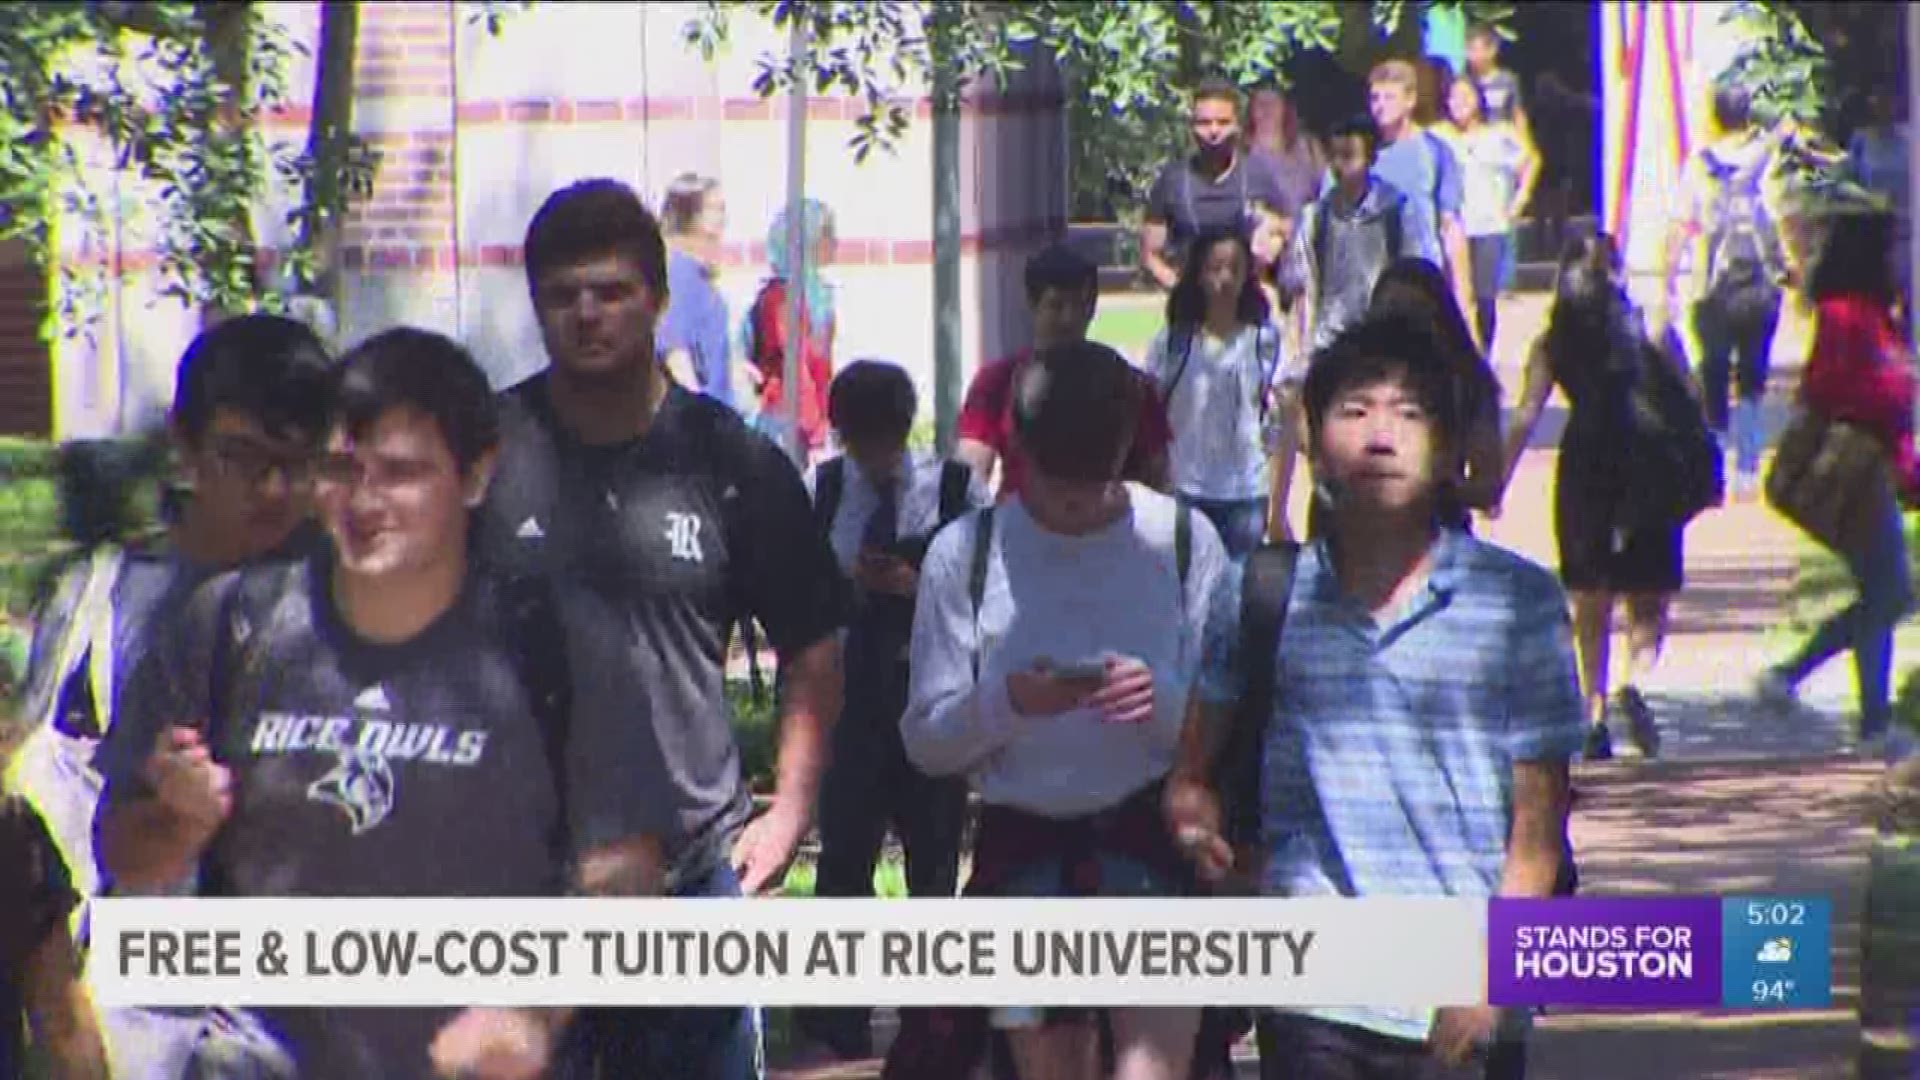 Rice University on Tuesday announced a new initiative to make education more affordable for students from families with incomes under $200,000.